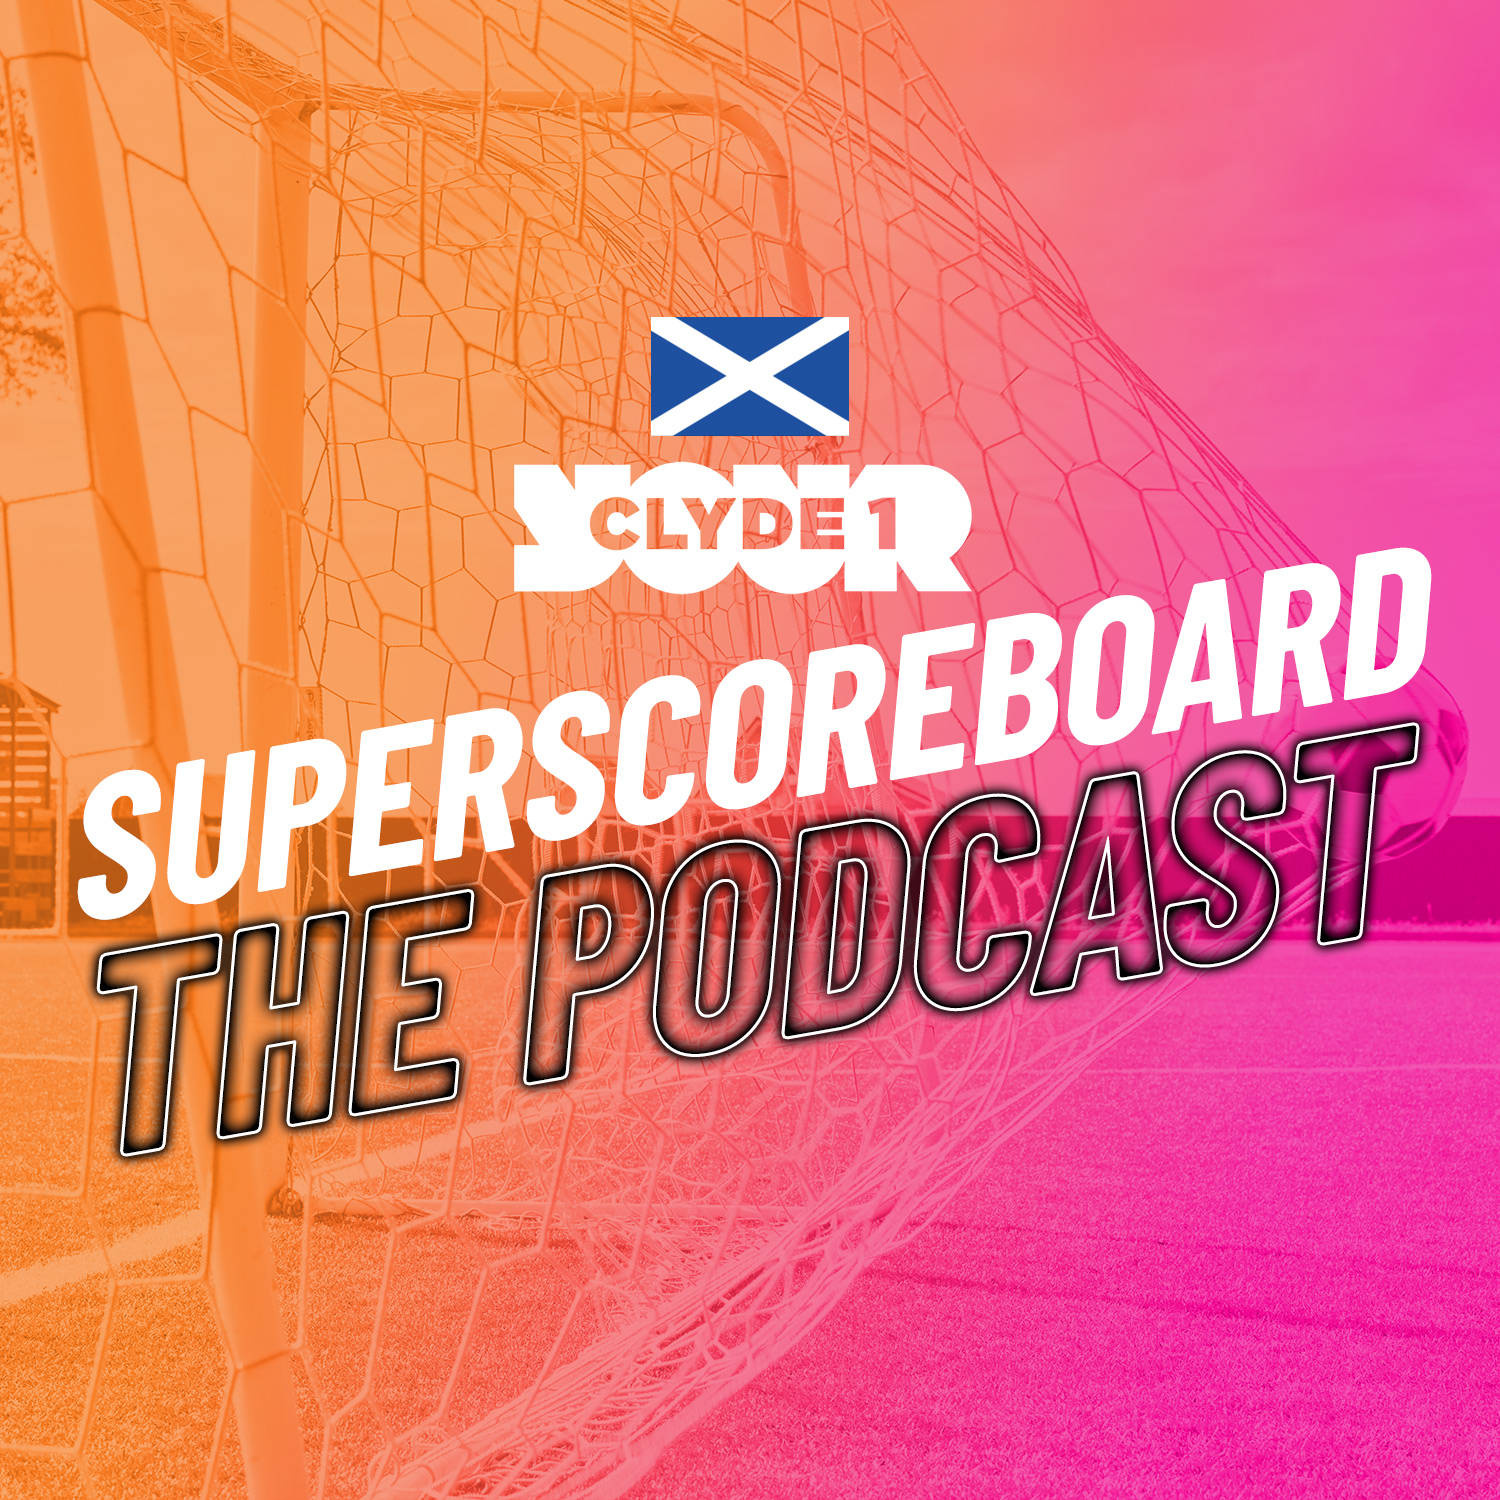 Friday 5th January Clyde 1 Superscoreboard